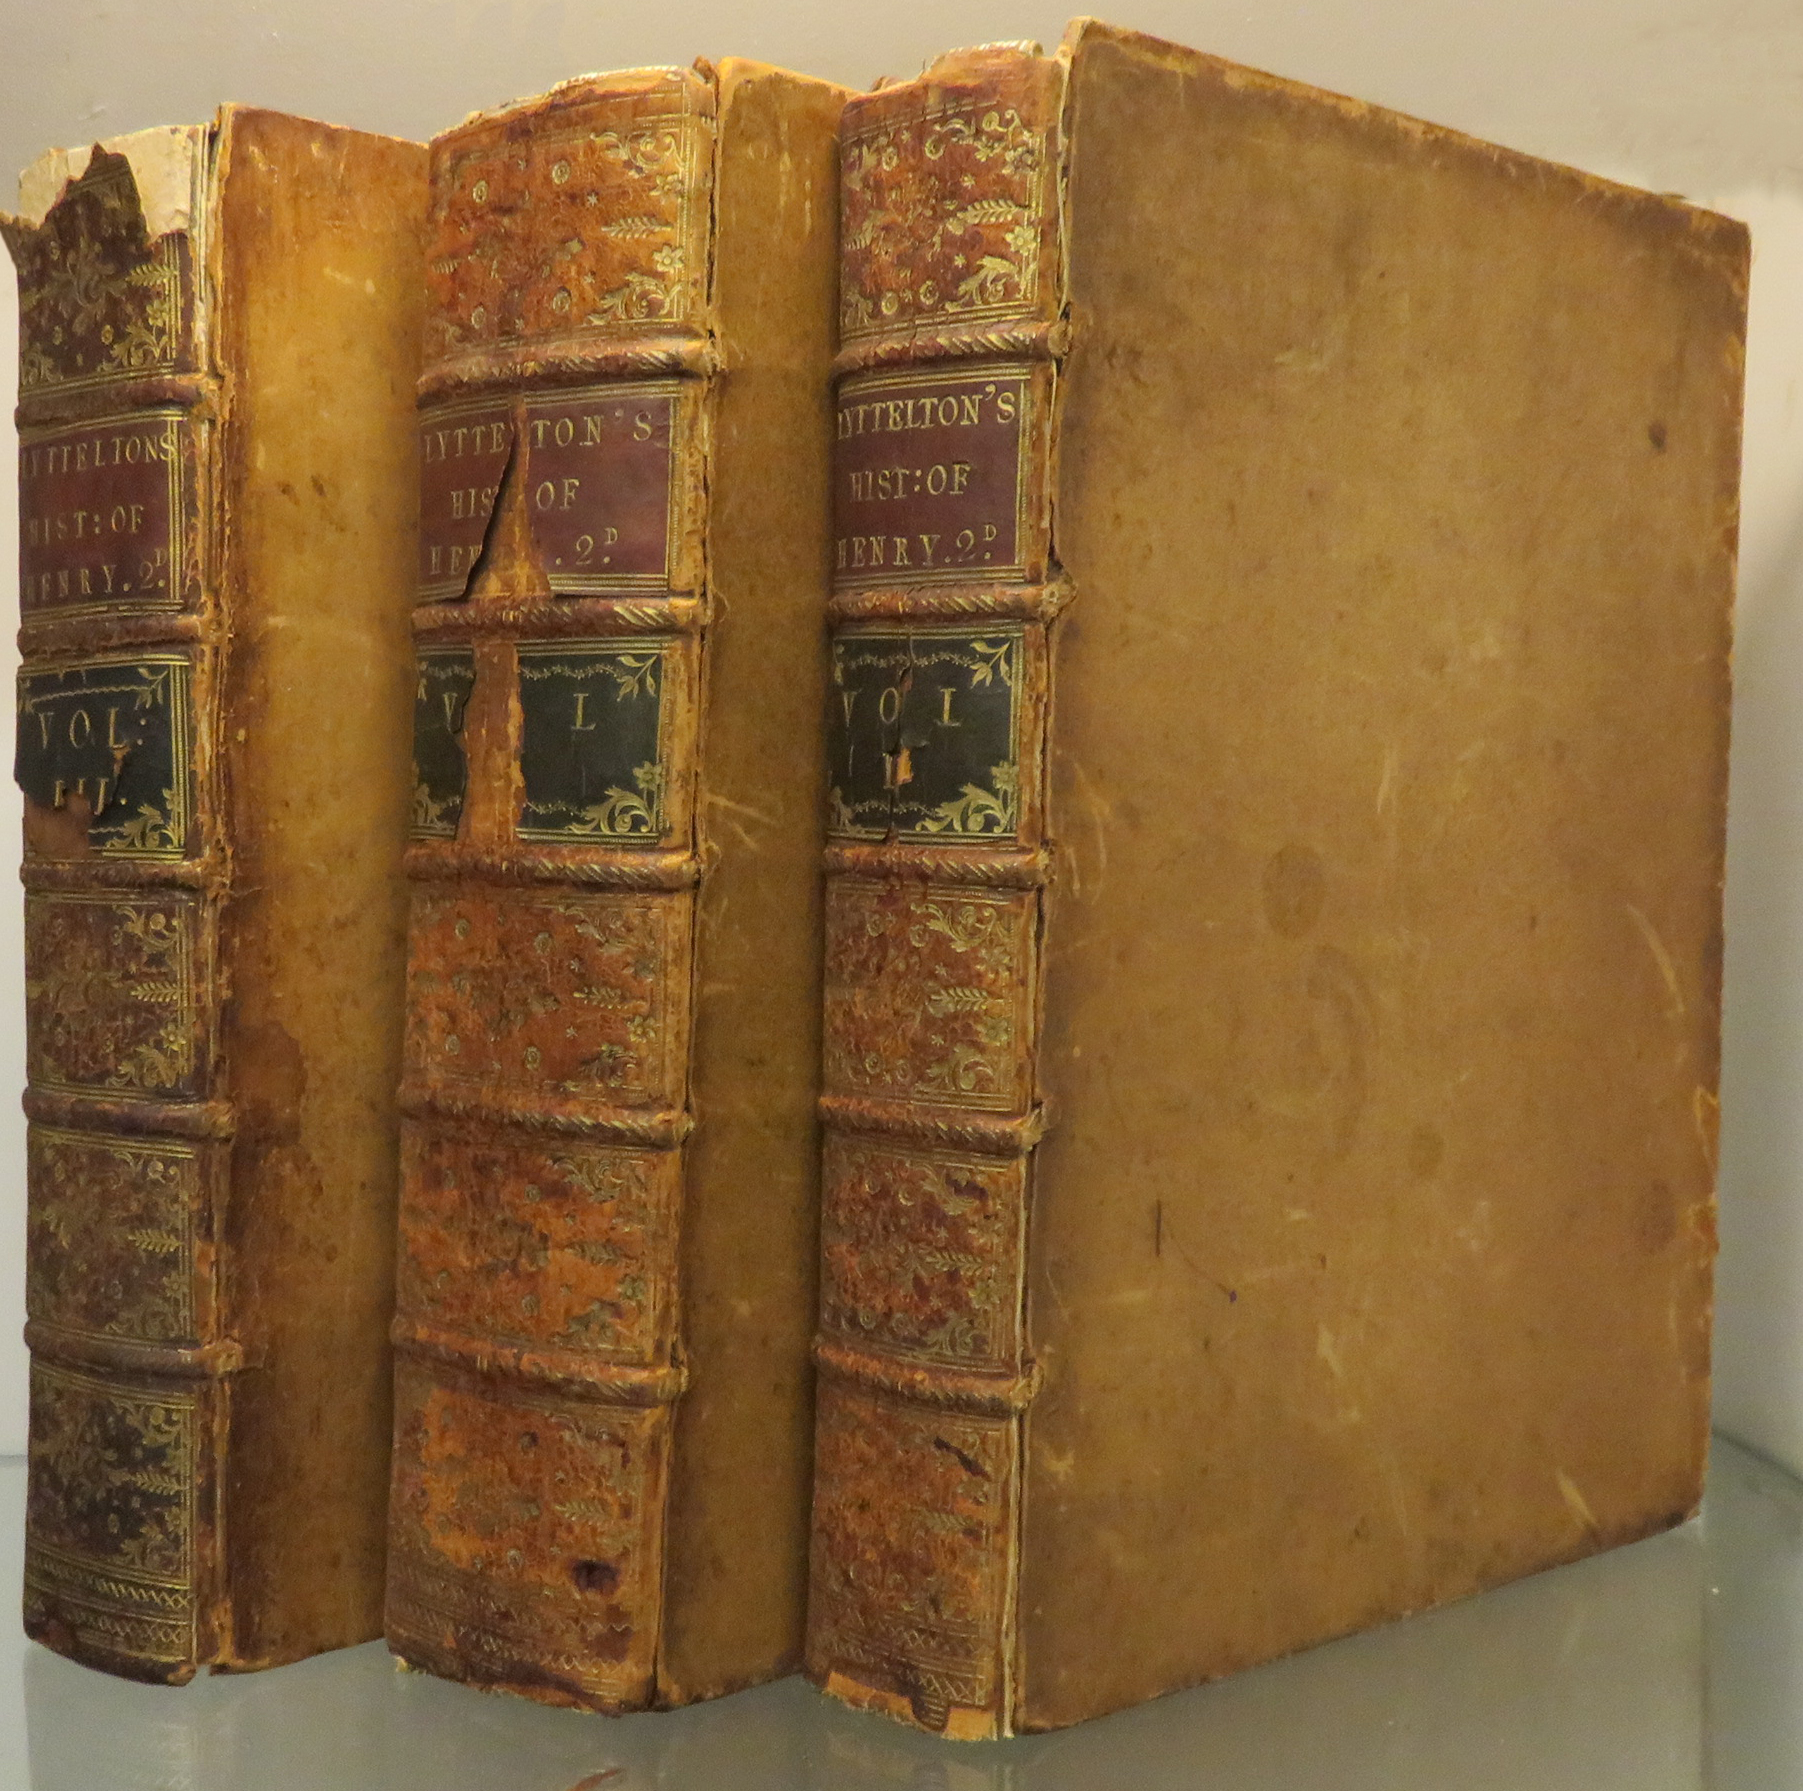 The History Of The Life Of King Henry The Second, And Of the Age In Which he He Lived, In Five Books; Second Edition Three Volumes Only 